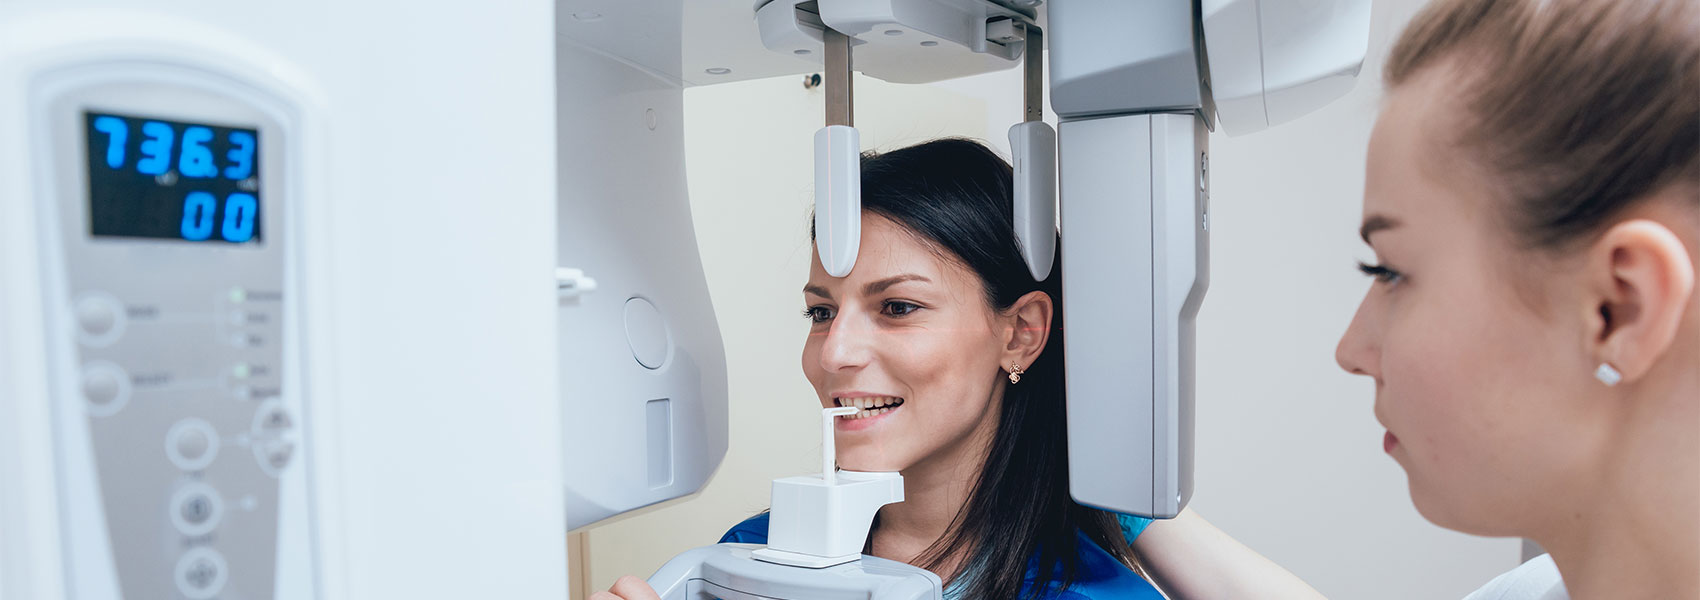 Dentist scan the patient with machine